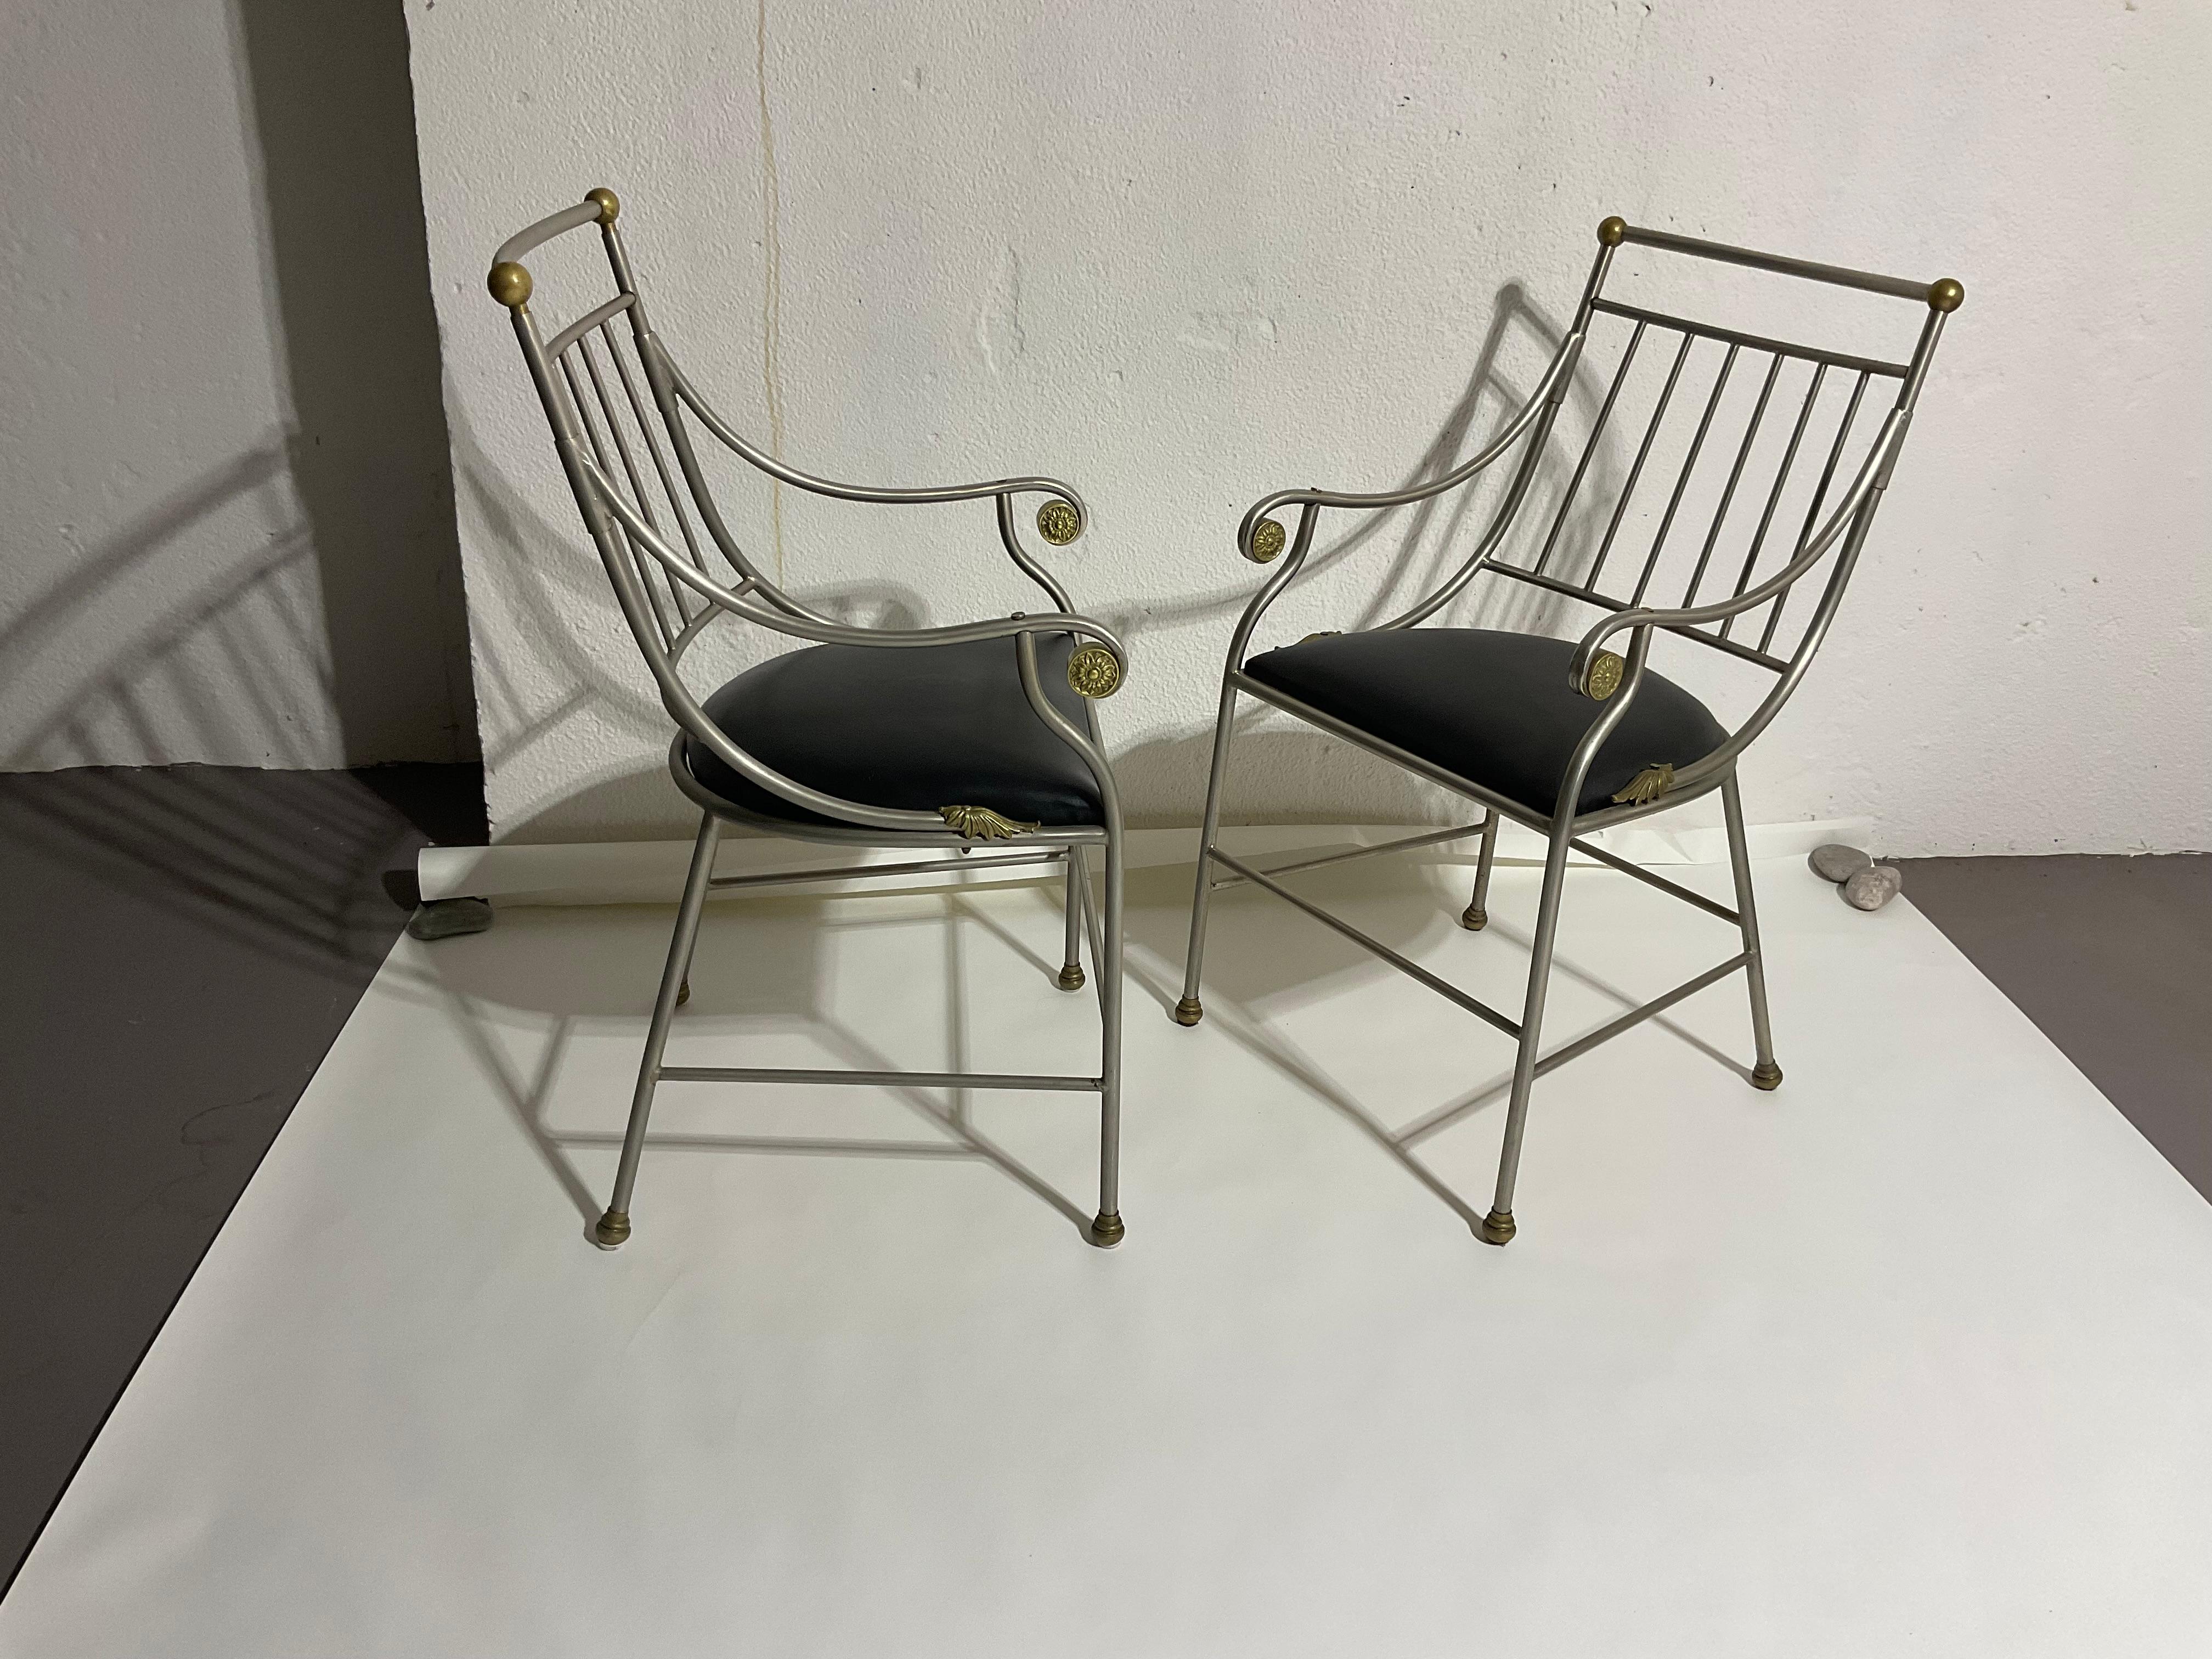 French Antique Art Deco Pair of Steel chairs with gilt decoration highlights  For Sale 5